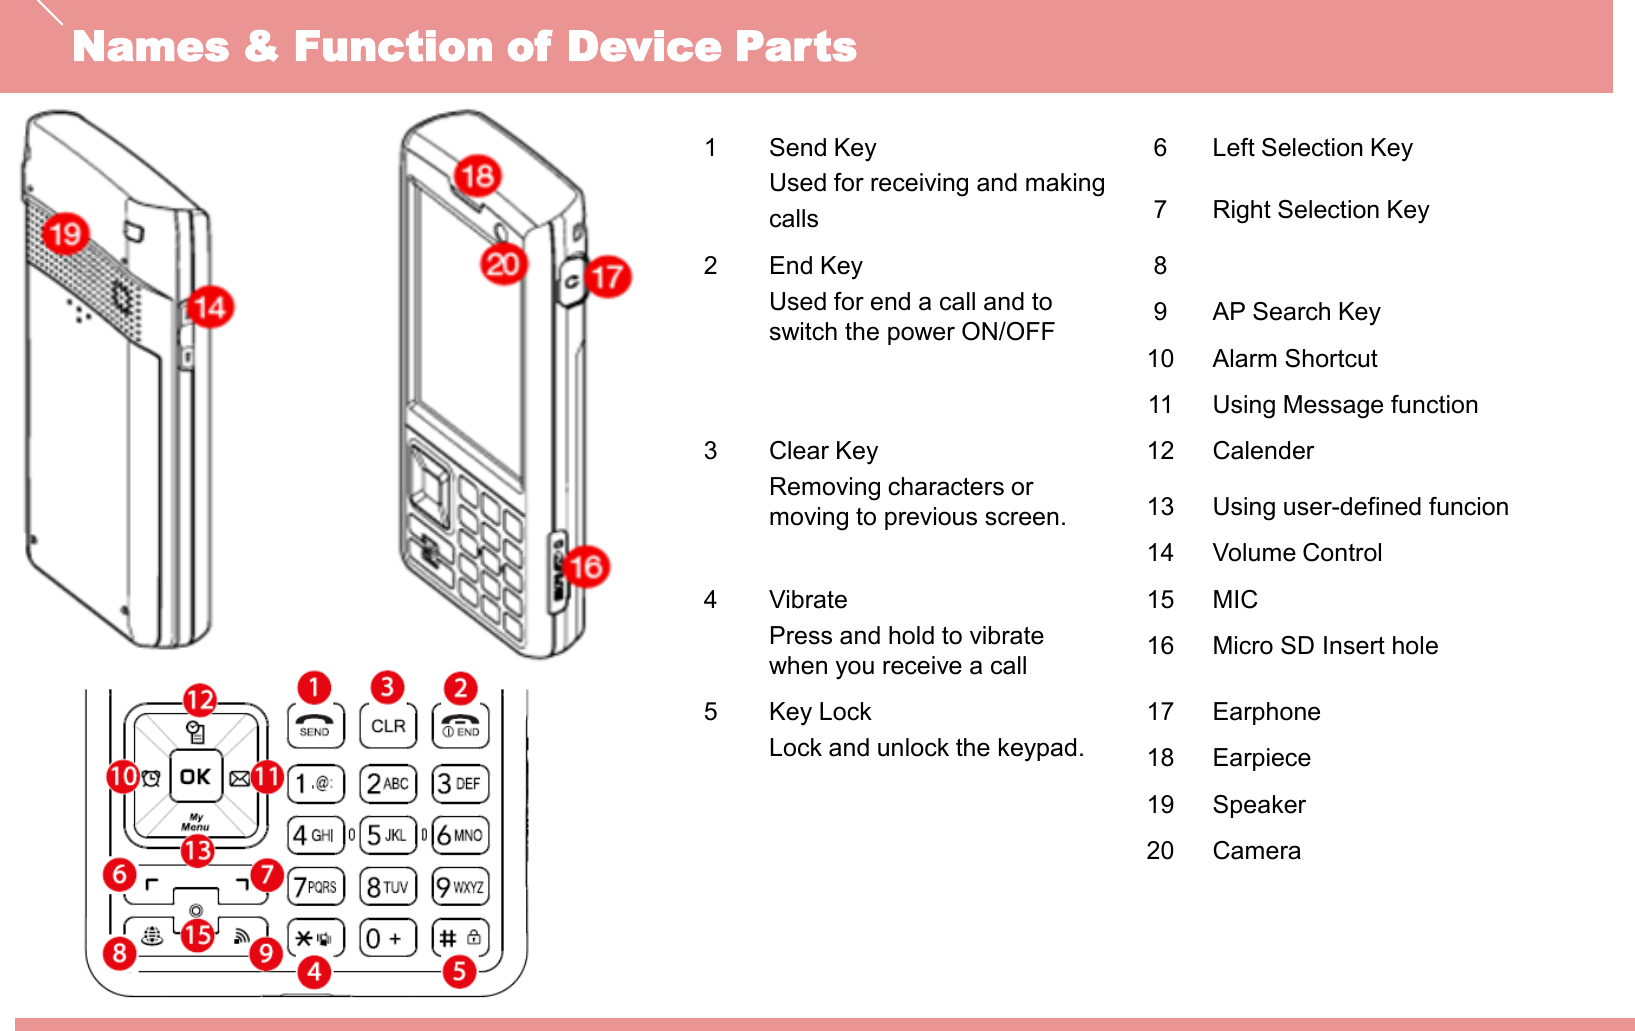 Names &amp; Function of Device Parts1 Send KeyUsed for receiving and makingcalls6 Left Selection Key7 Right Selection Key2 End KeyUsed for end a call and to switch the power ON/OFF89 AP Search Key10 Alarm Shortcut11 Using Message function3 Clear KeyRemoving characters or moving to previous screen.12 Calender13 Using user-defined funcion14 Volume Control4 VibratePress and hold to vibrate when you receive a call 15 MIC16 Micro SD Insert hole5 Key LockLock and unlock the keypad.17 Earphone18 Earpiece19 Speaker20 Camera